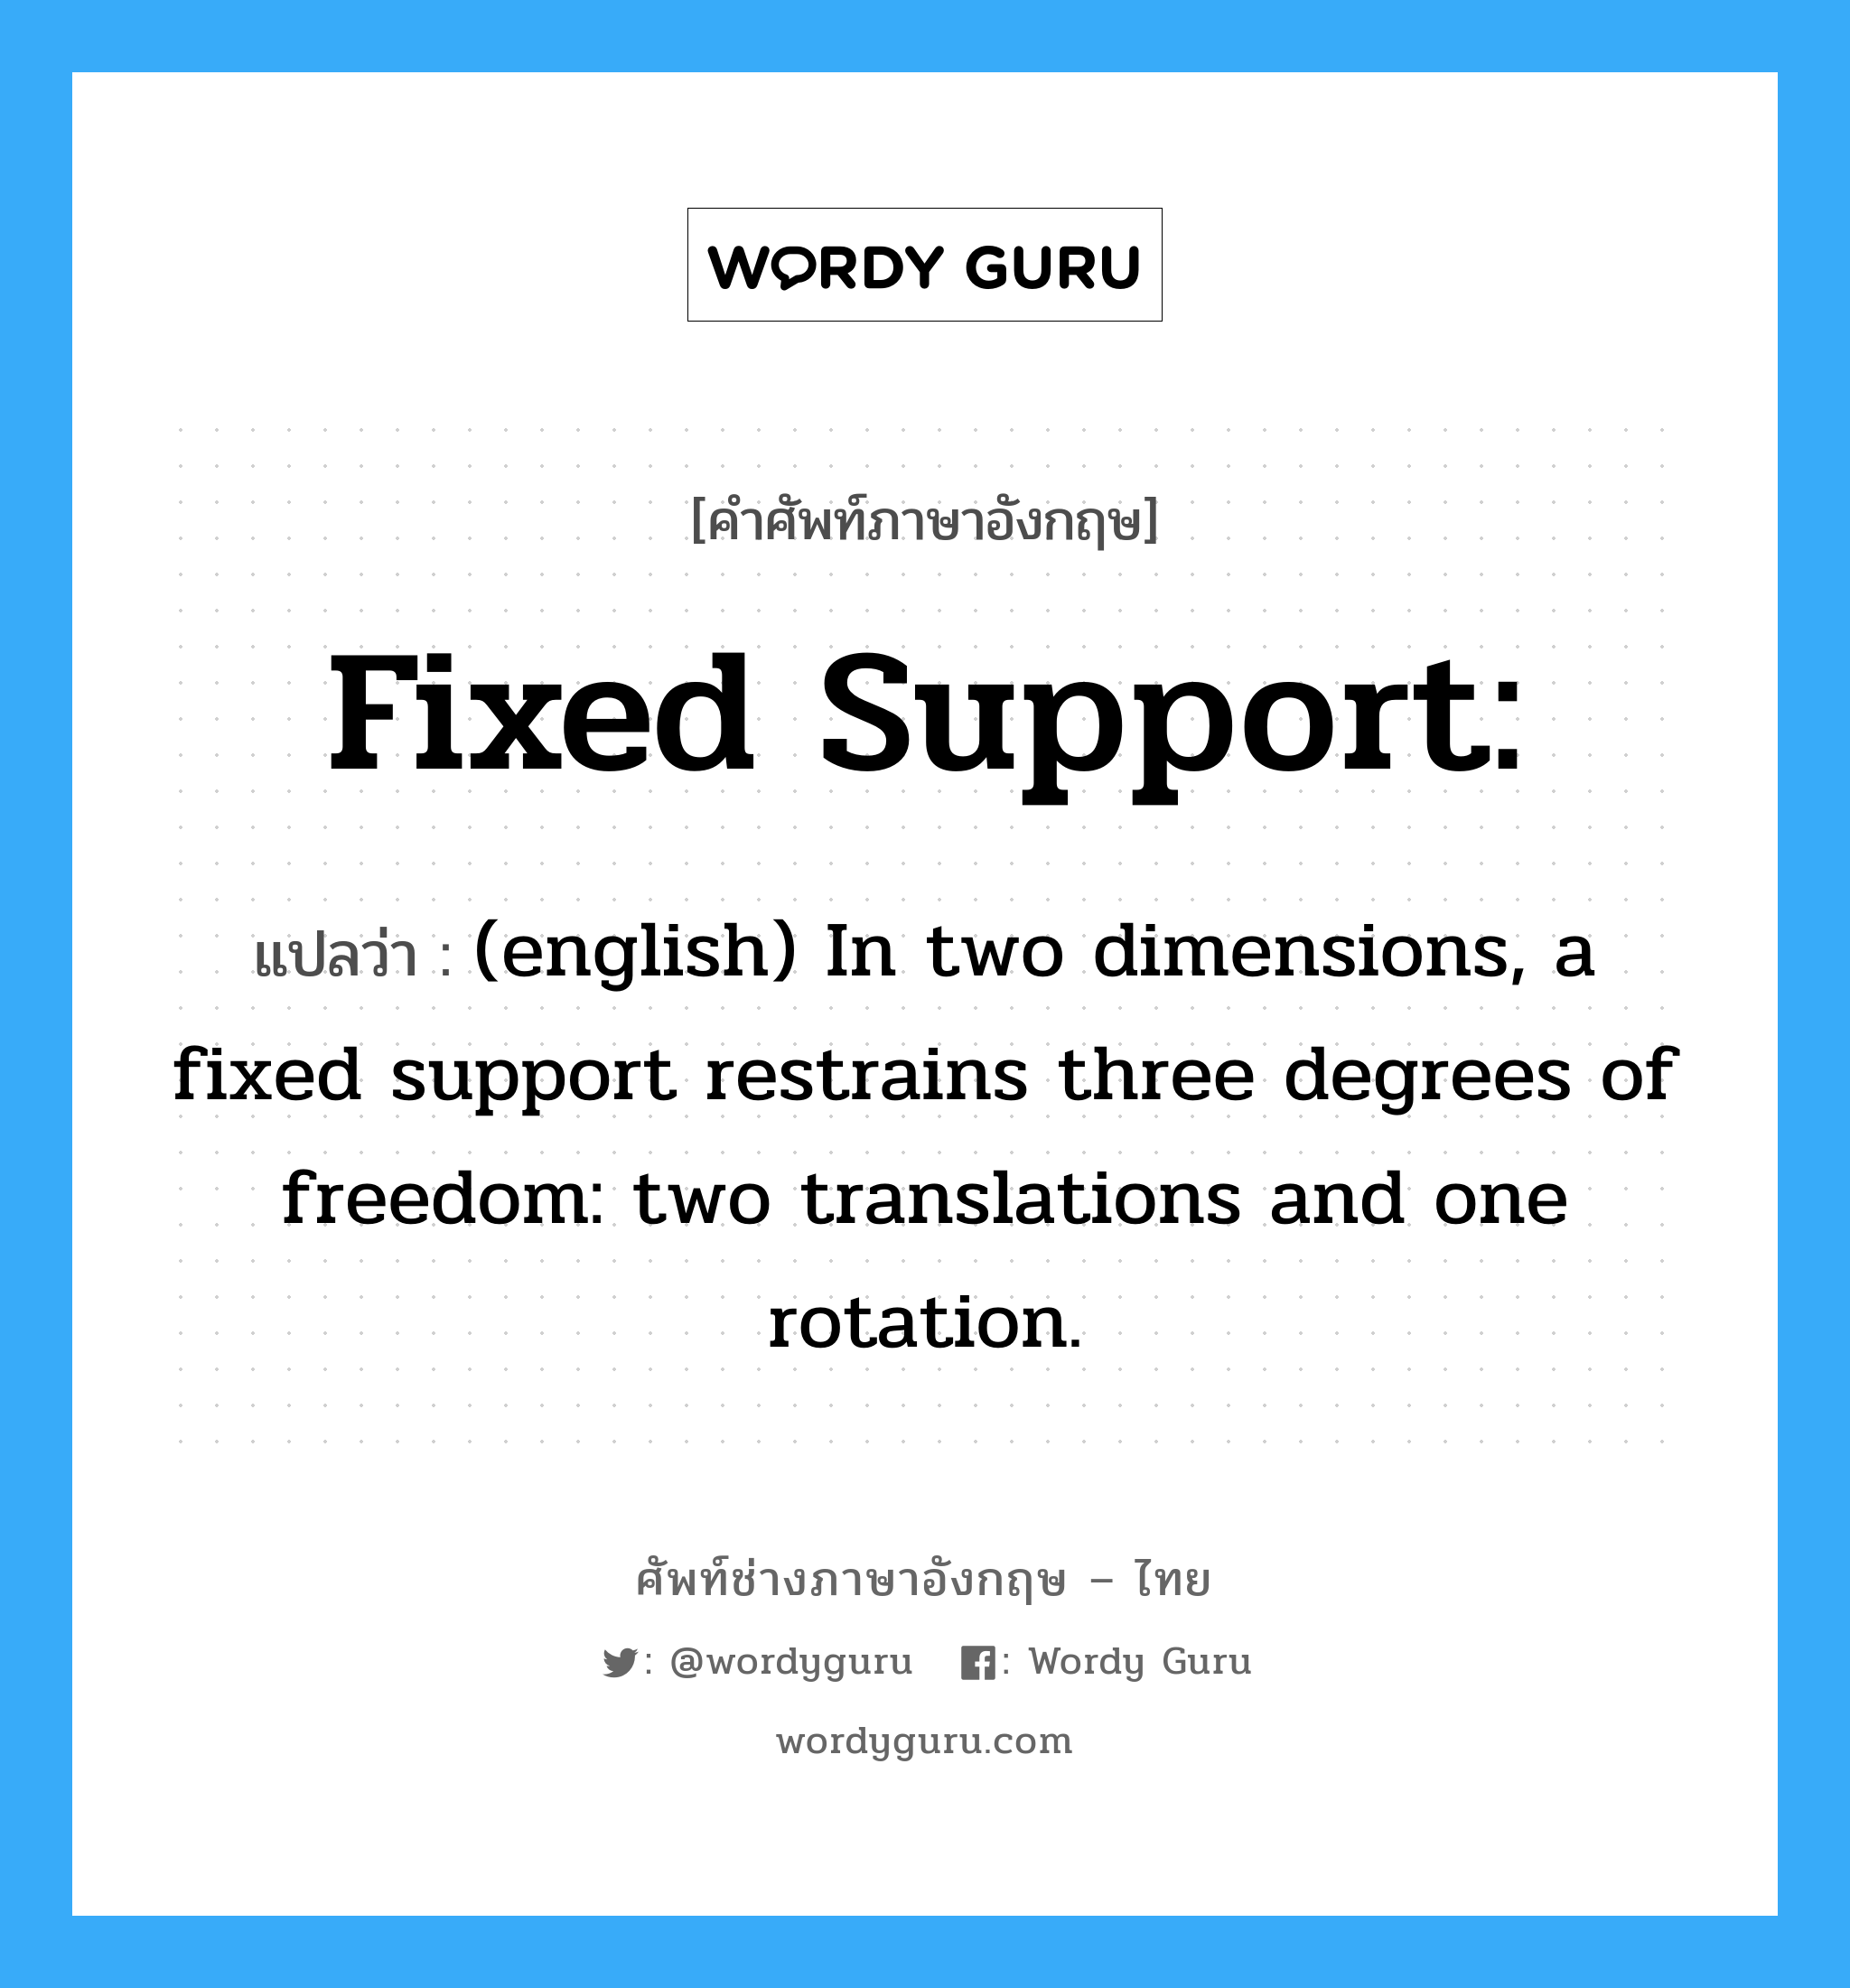 Fixed support: แปลว่า?, คำศัพท์ช่างภาษาอังกฤษ - ไทย Fixed support: คำศัพท์ภาษาอังกฤษ Fixed support: แปลว่า (english) In two dimensions, a fixed support restrains three degrees of freedom: two translations and one rotation.